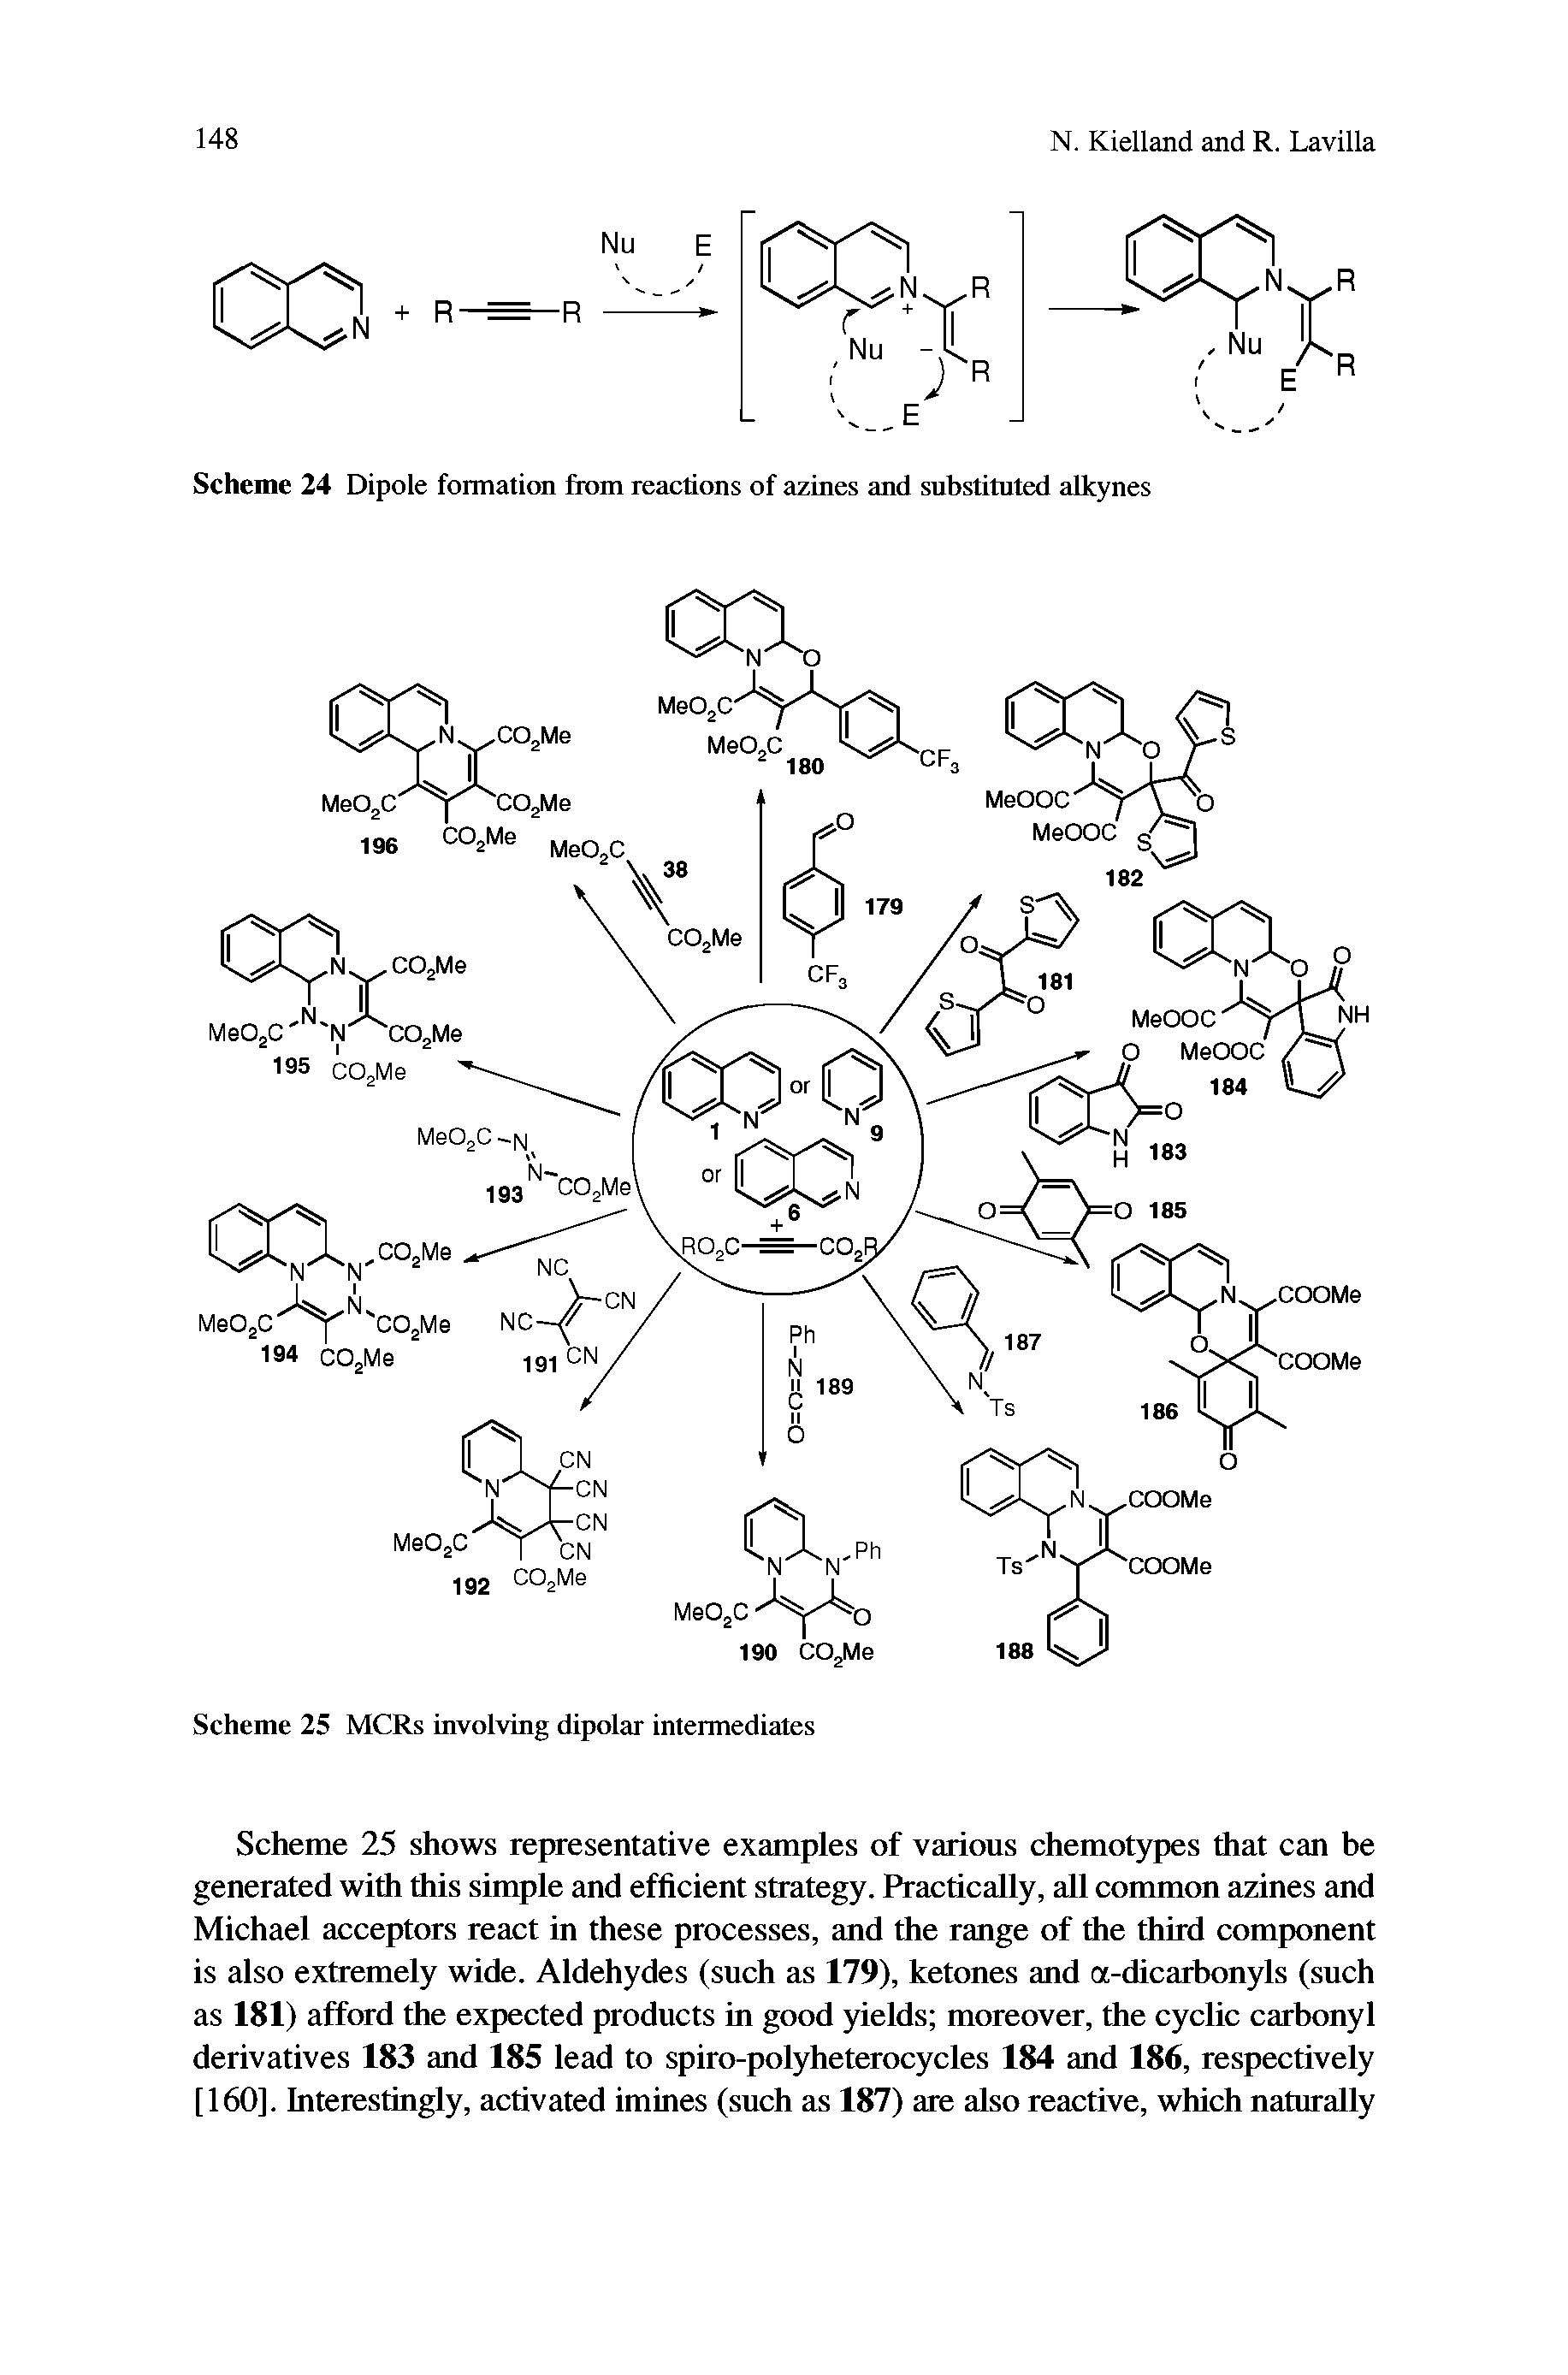 Scheme 24 Dipole formation from reactions of azines and substituted alkynes...